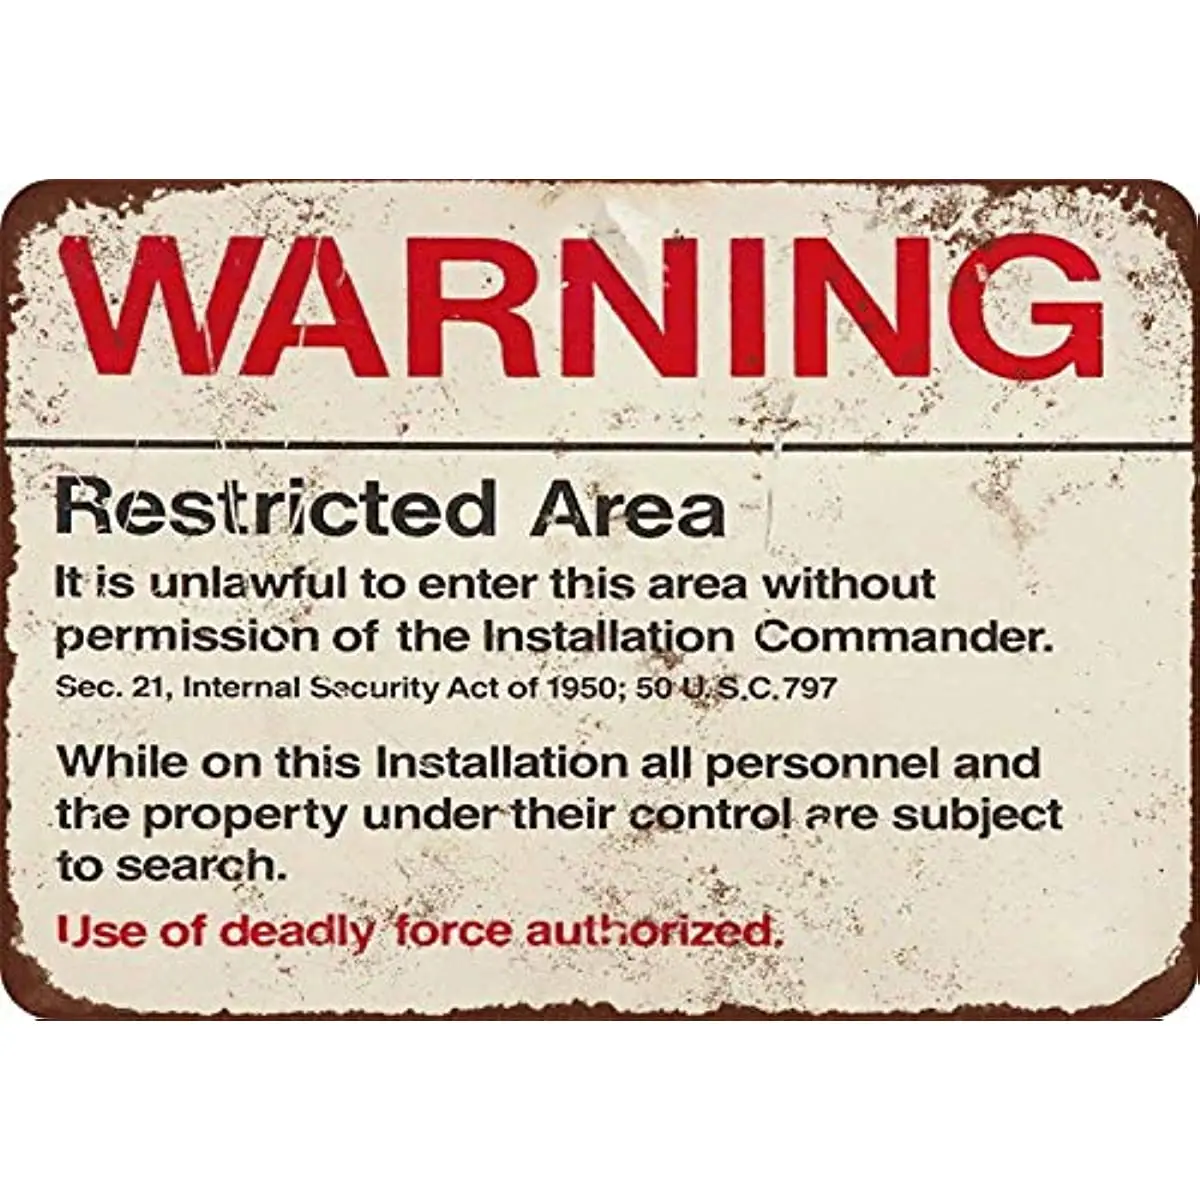 

For Ranch Metal Signs Vintage Yard Decor Art Tin Sign 8 x 12 Retro Warning Restricted Military Area 51 Vintage Look Basement